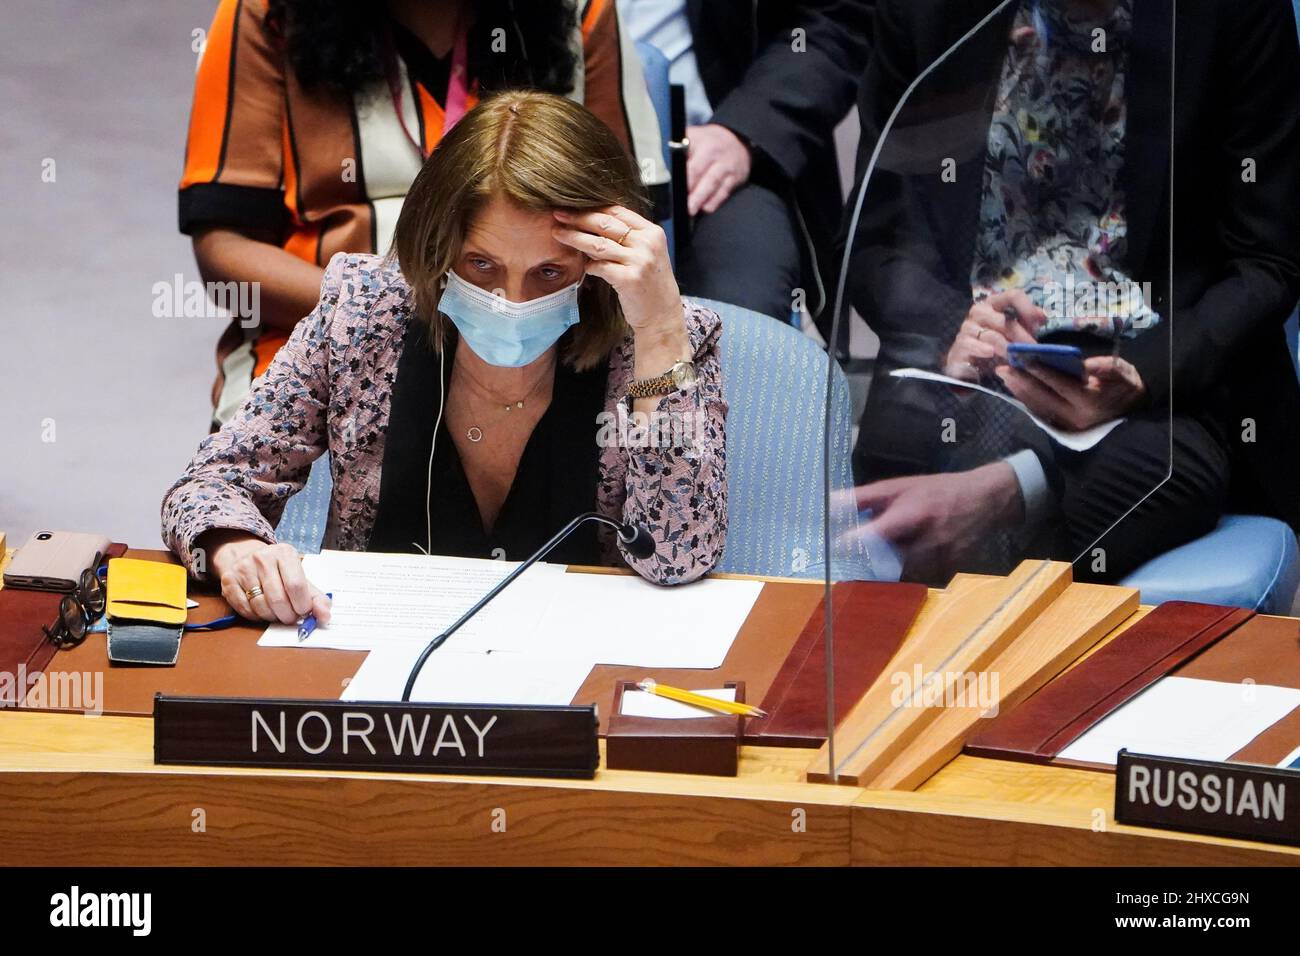 Norway's Ambassador to the U.N. Mona Juul attends the United Nations Security Council meeting on Threats to International Peace and Security, following Russia's invasion of Ukraine, in New York City, U.S. March 11, 2022. REUTERS/Carlo Allegri Stock Photo